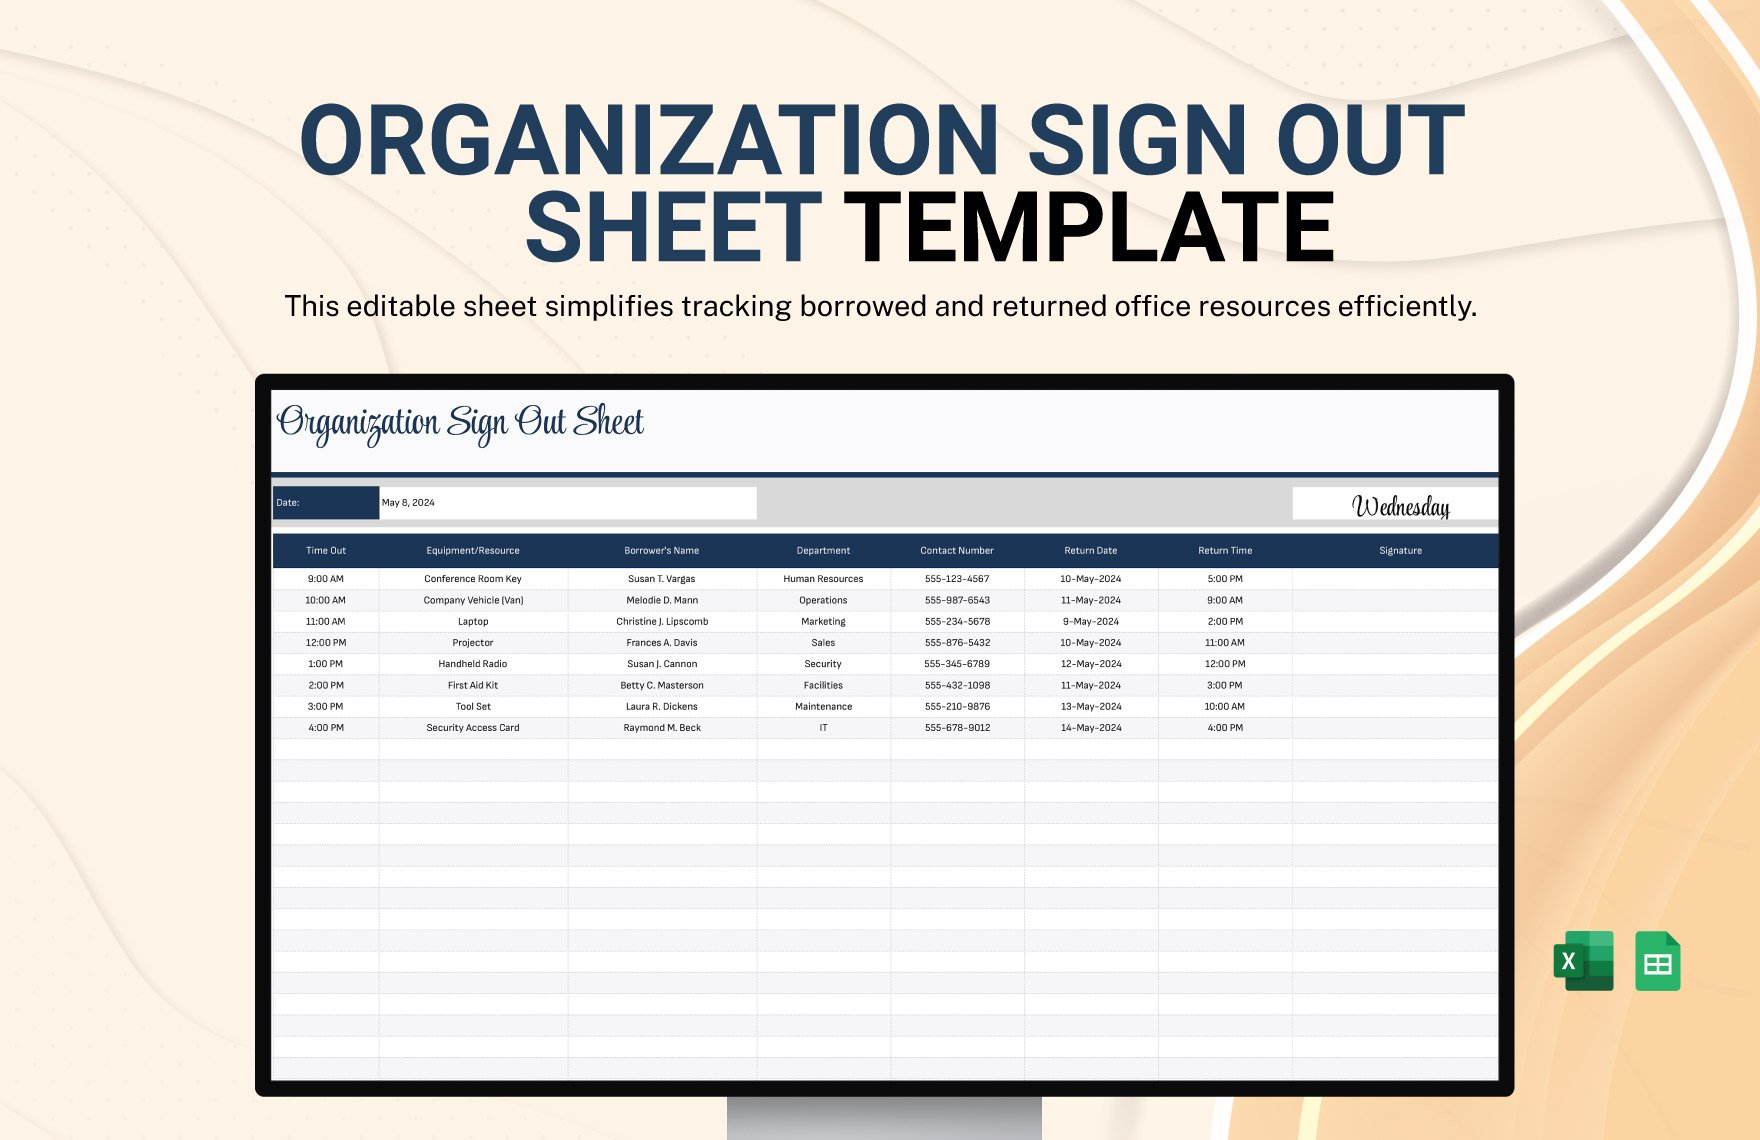 Organization Sign Out Sheet Template in Excel, Google Sheets